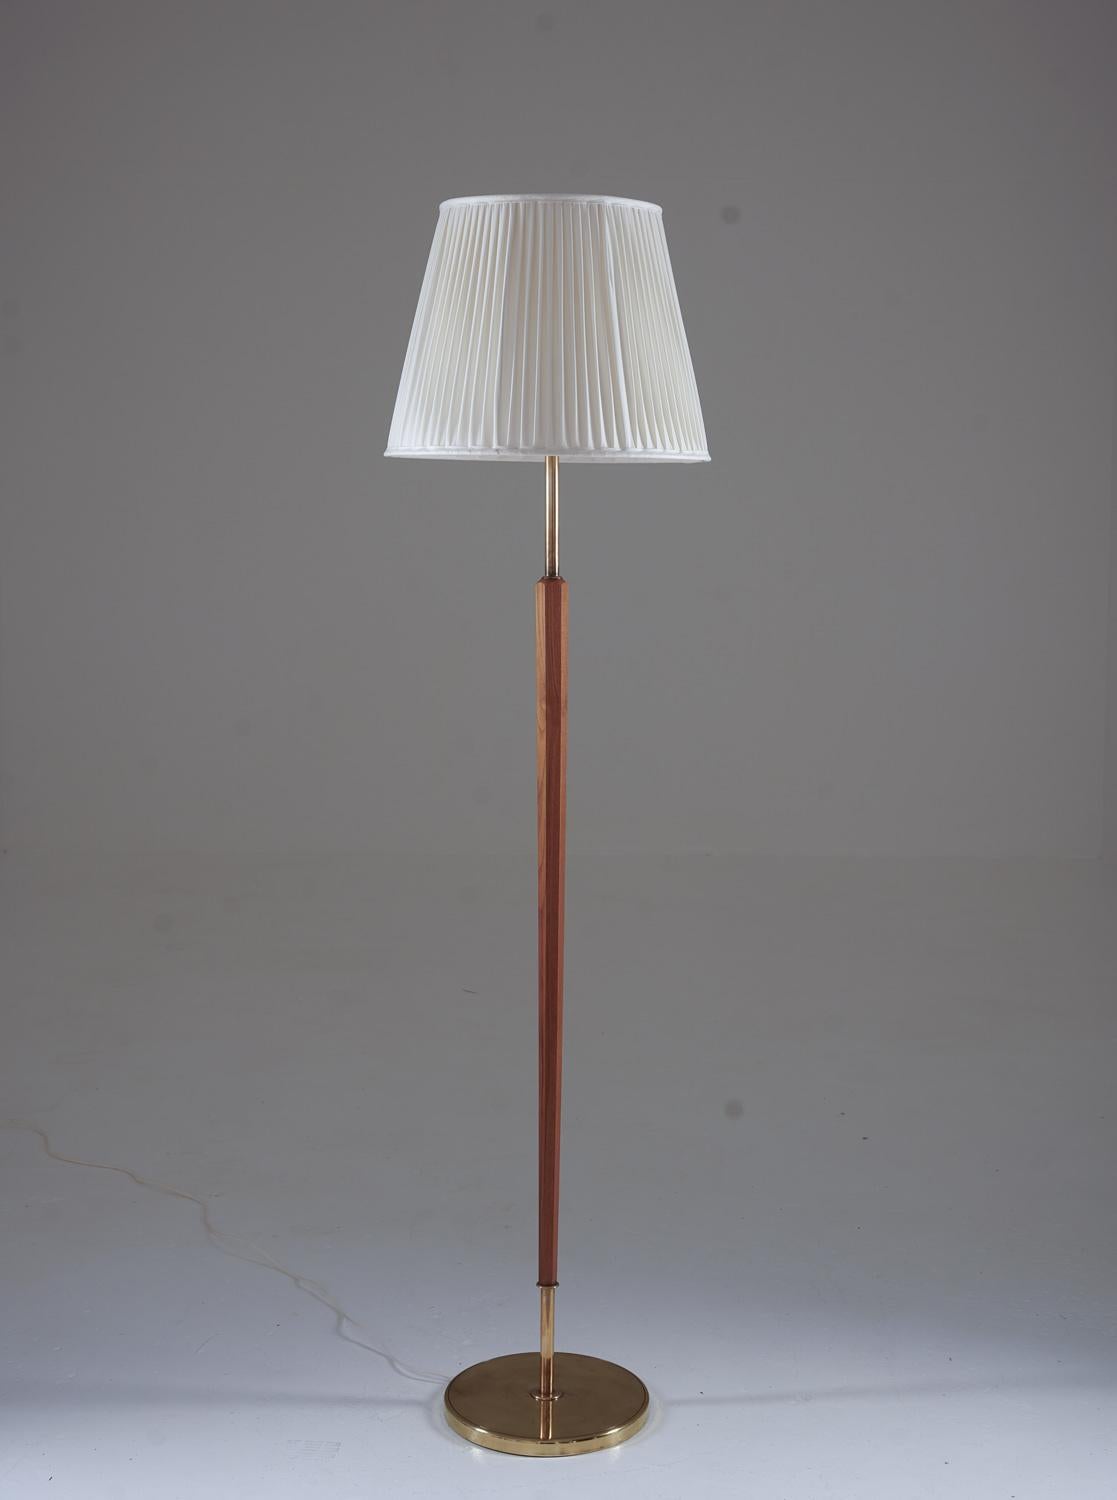 Large Scandinavian floor lamp manufactured by Boréns, Sweden, 1960s.
This high-quality lamp is made of brass and oak 

Condition: Very good condition. New custom-made hand-pleated chintz fabric shades.